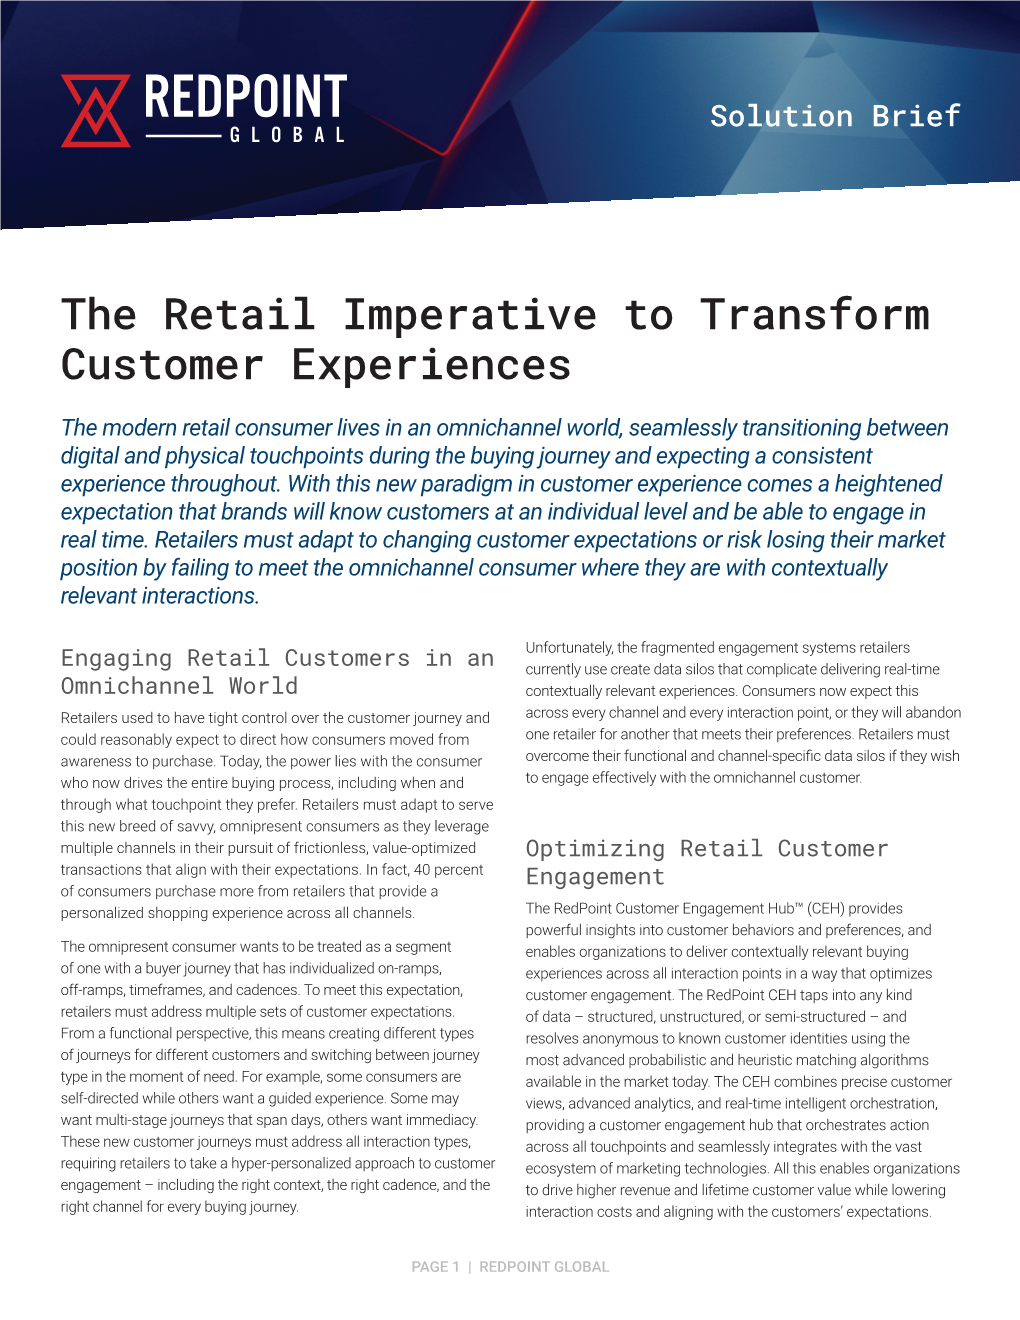 The Retail Imperative to Transform Customer Experiences